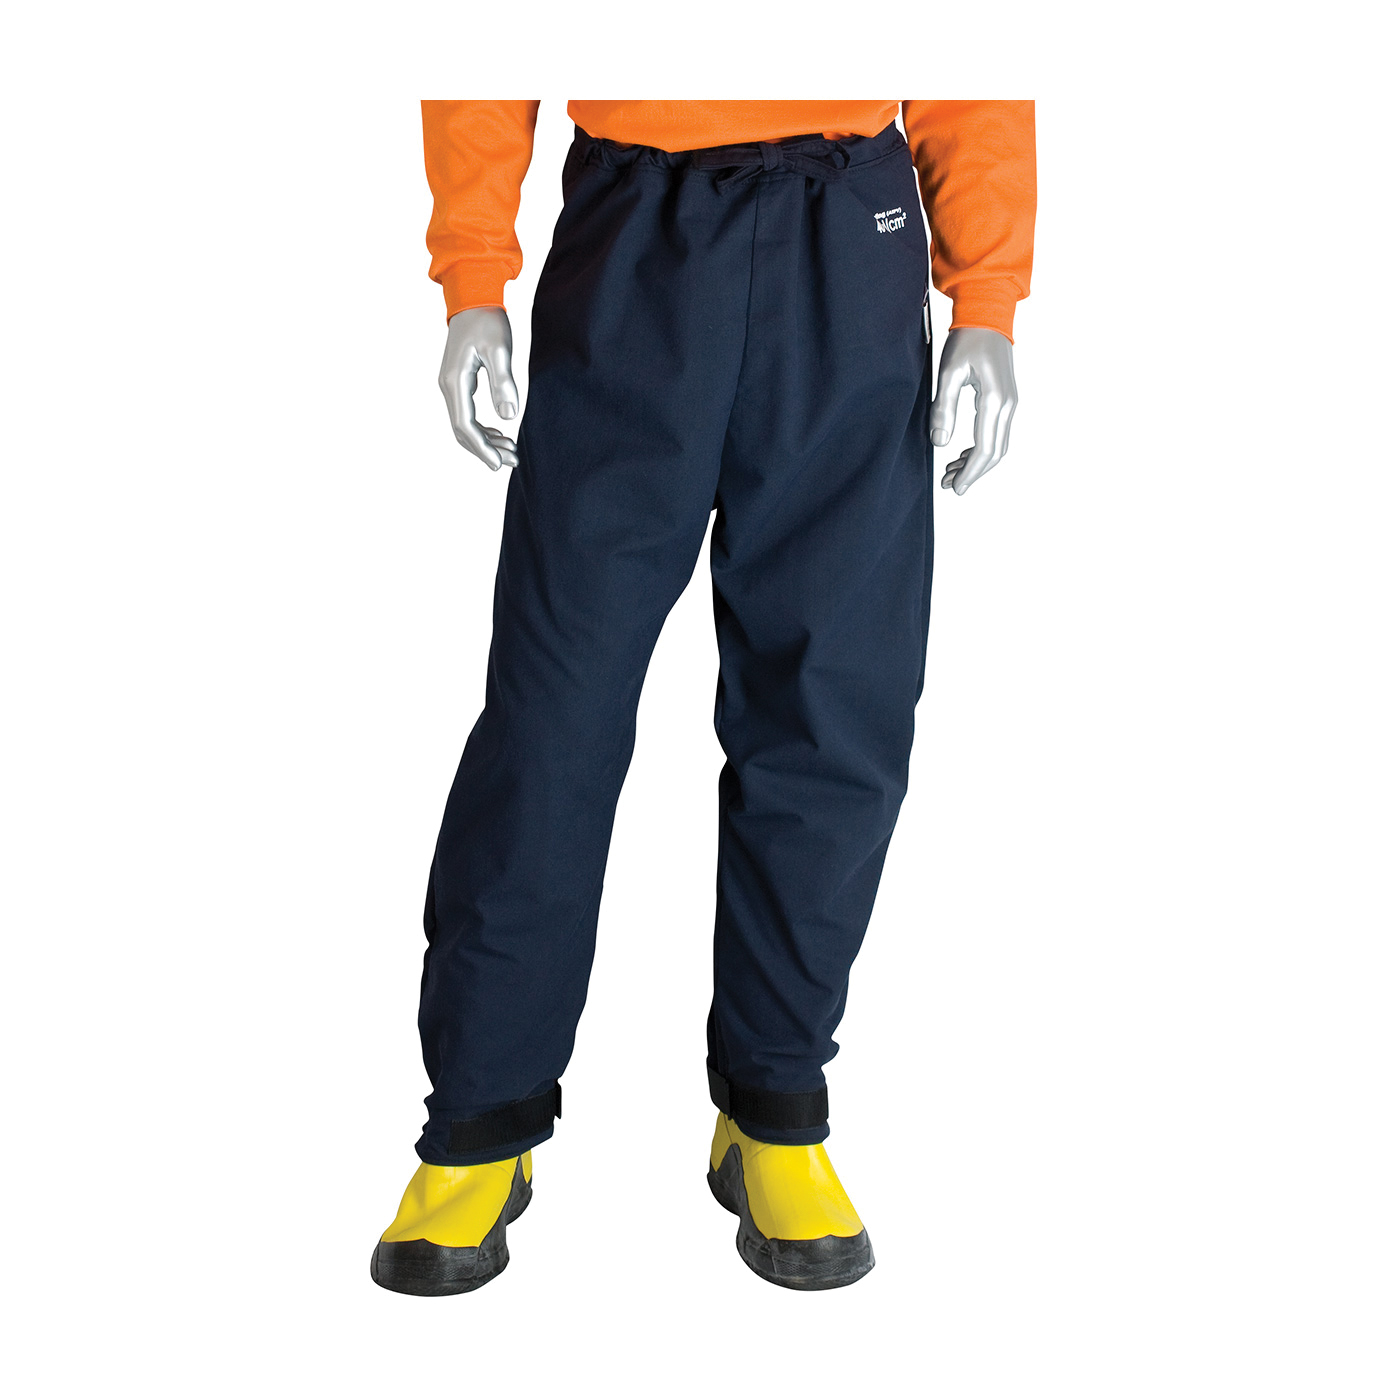 PIP® 9100-530ULT/L 9100-530ULT Ultralight Flame Resistant Pant, 40 to 42 in Waist, 32 in L Inseam, Navy Blue, DuPont™ Protera®/Westex® UltraSoft® Interlock Knit